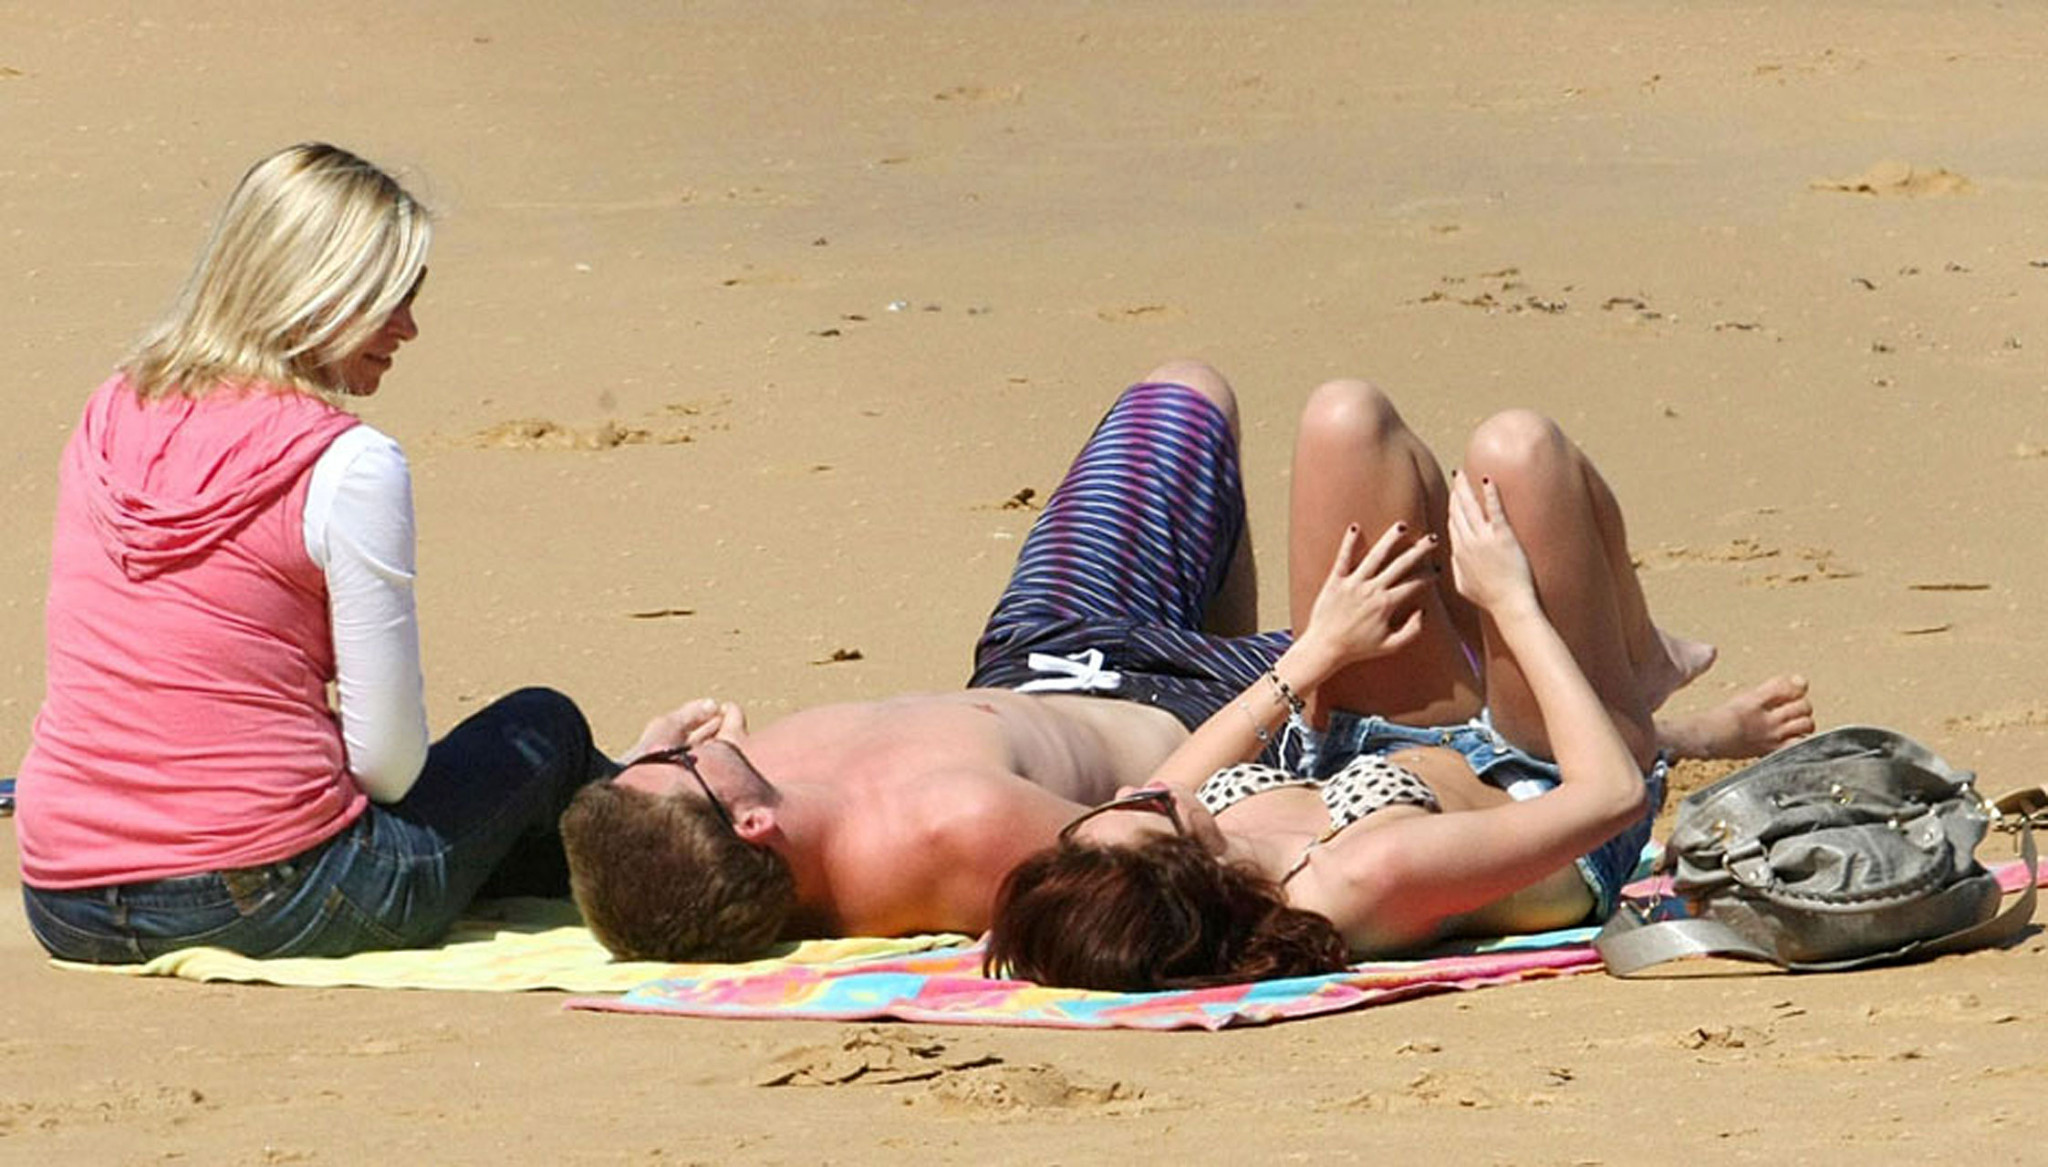 Miley Cyrus making love with her boyfriend on beach very sexy photos #75360177